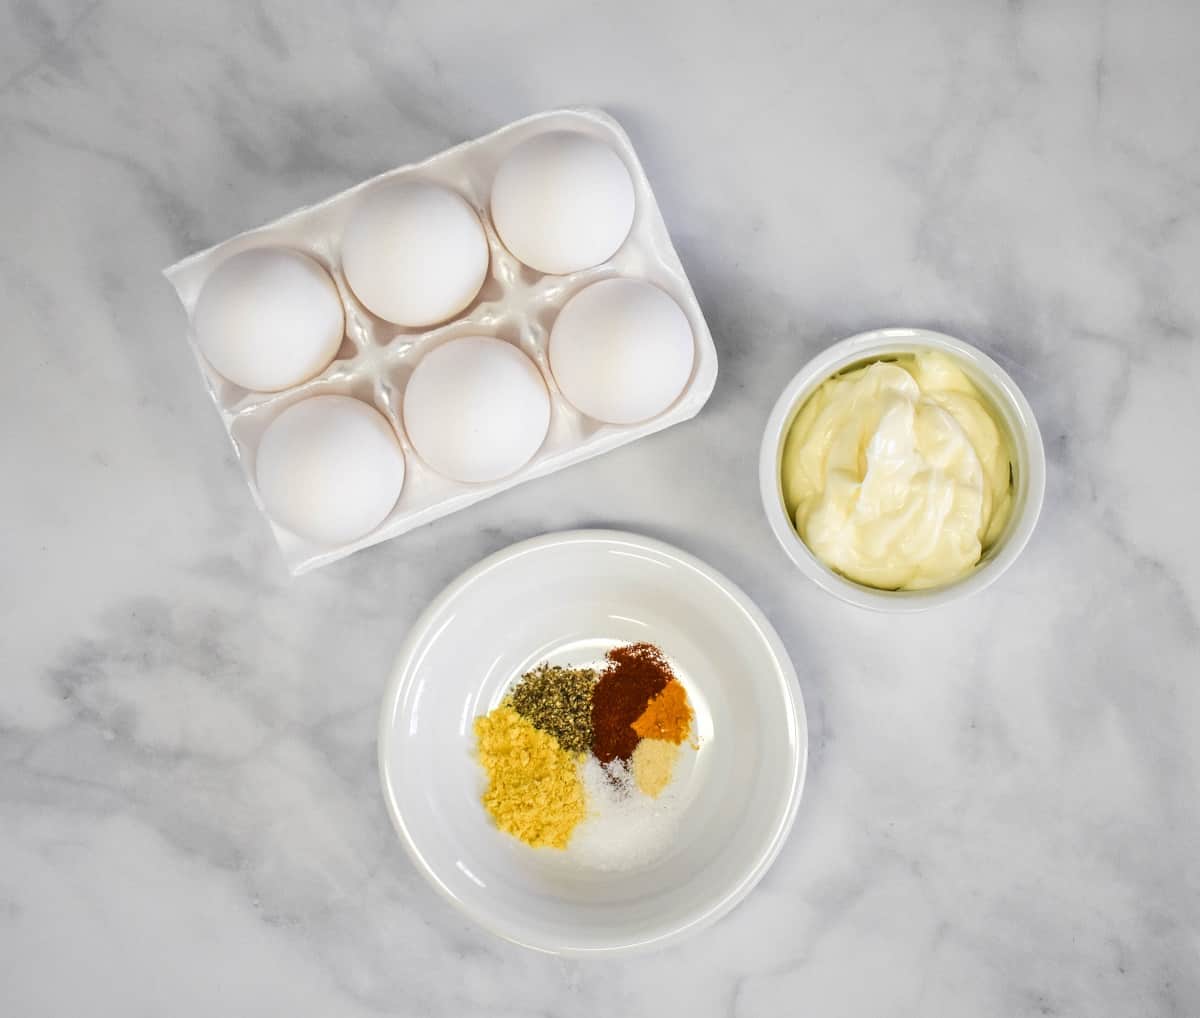 The ingredients for the egg salad arranged on a white table. The spices are displayed on a small white plate.